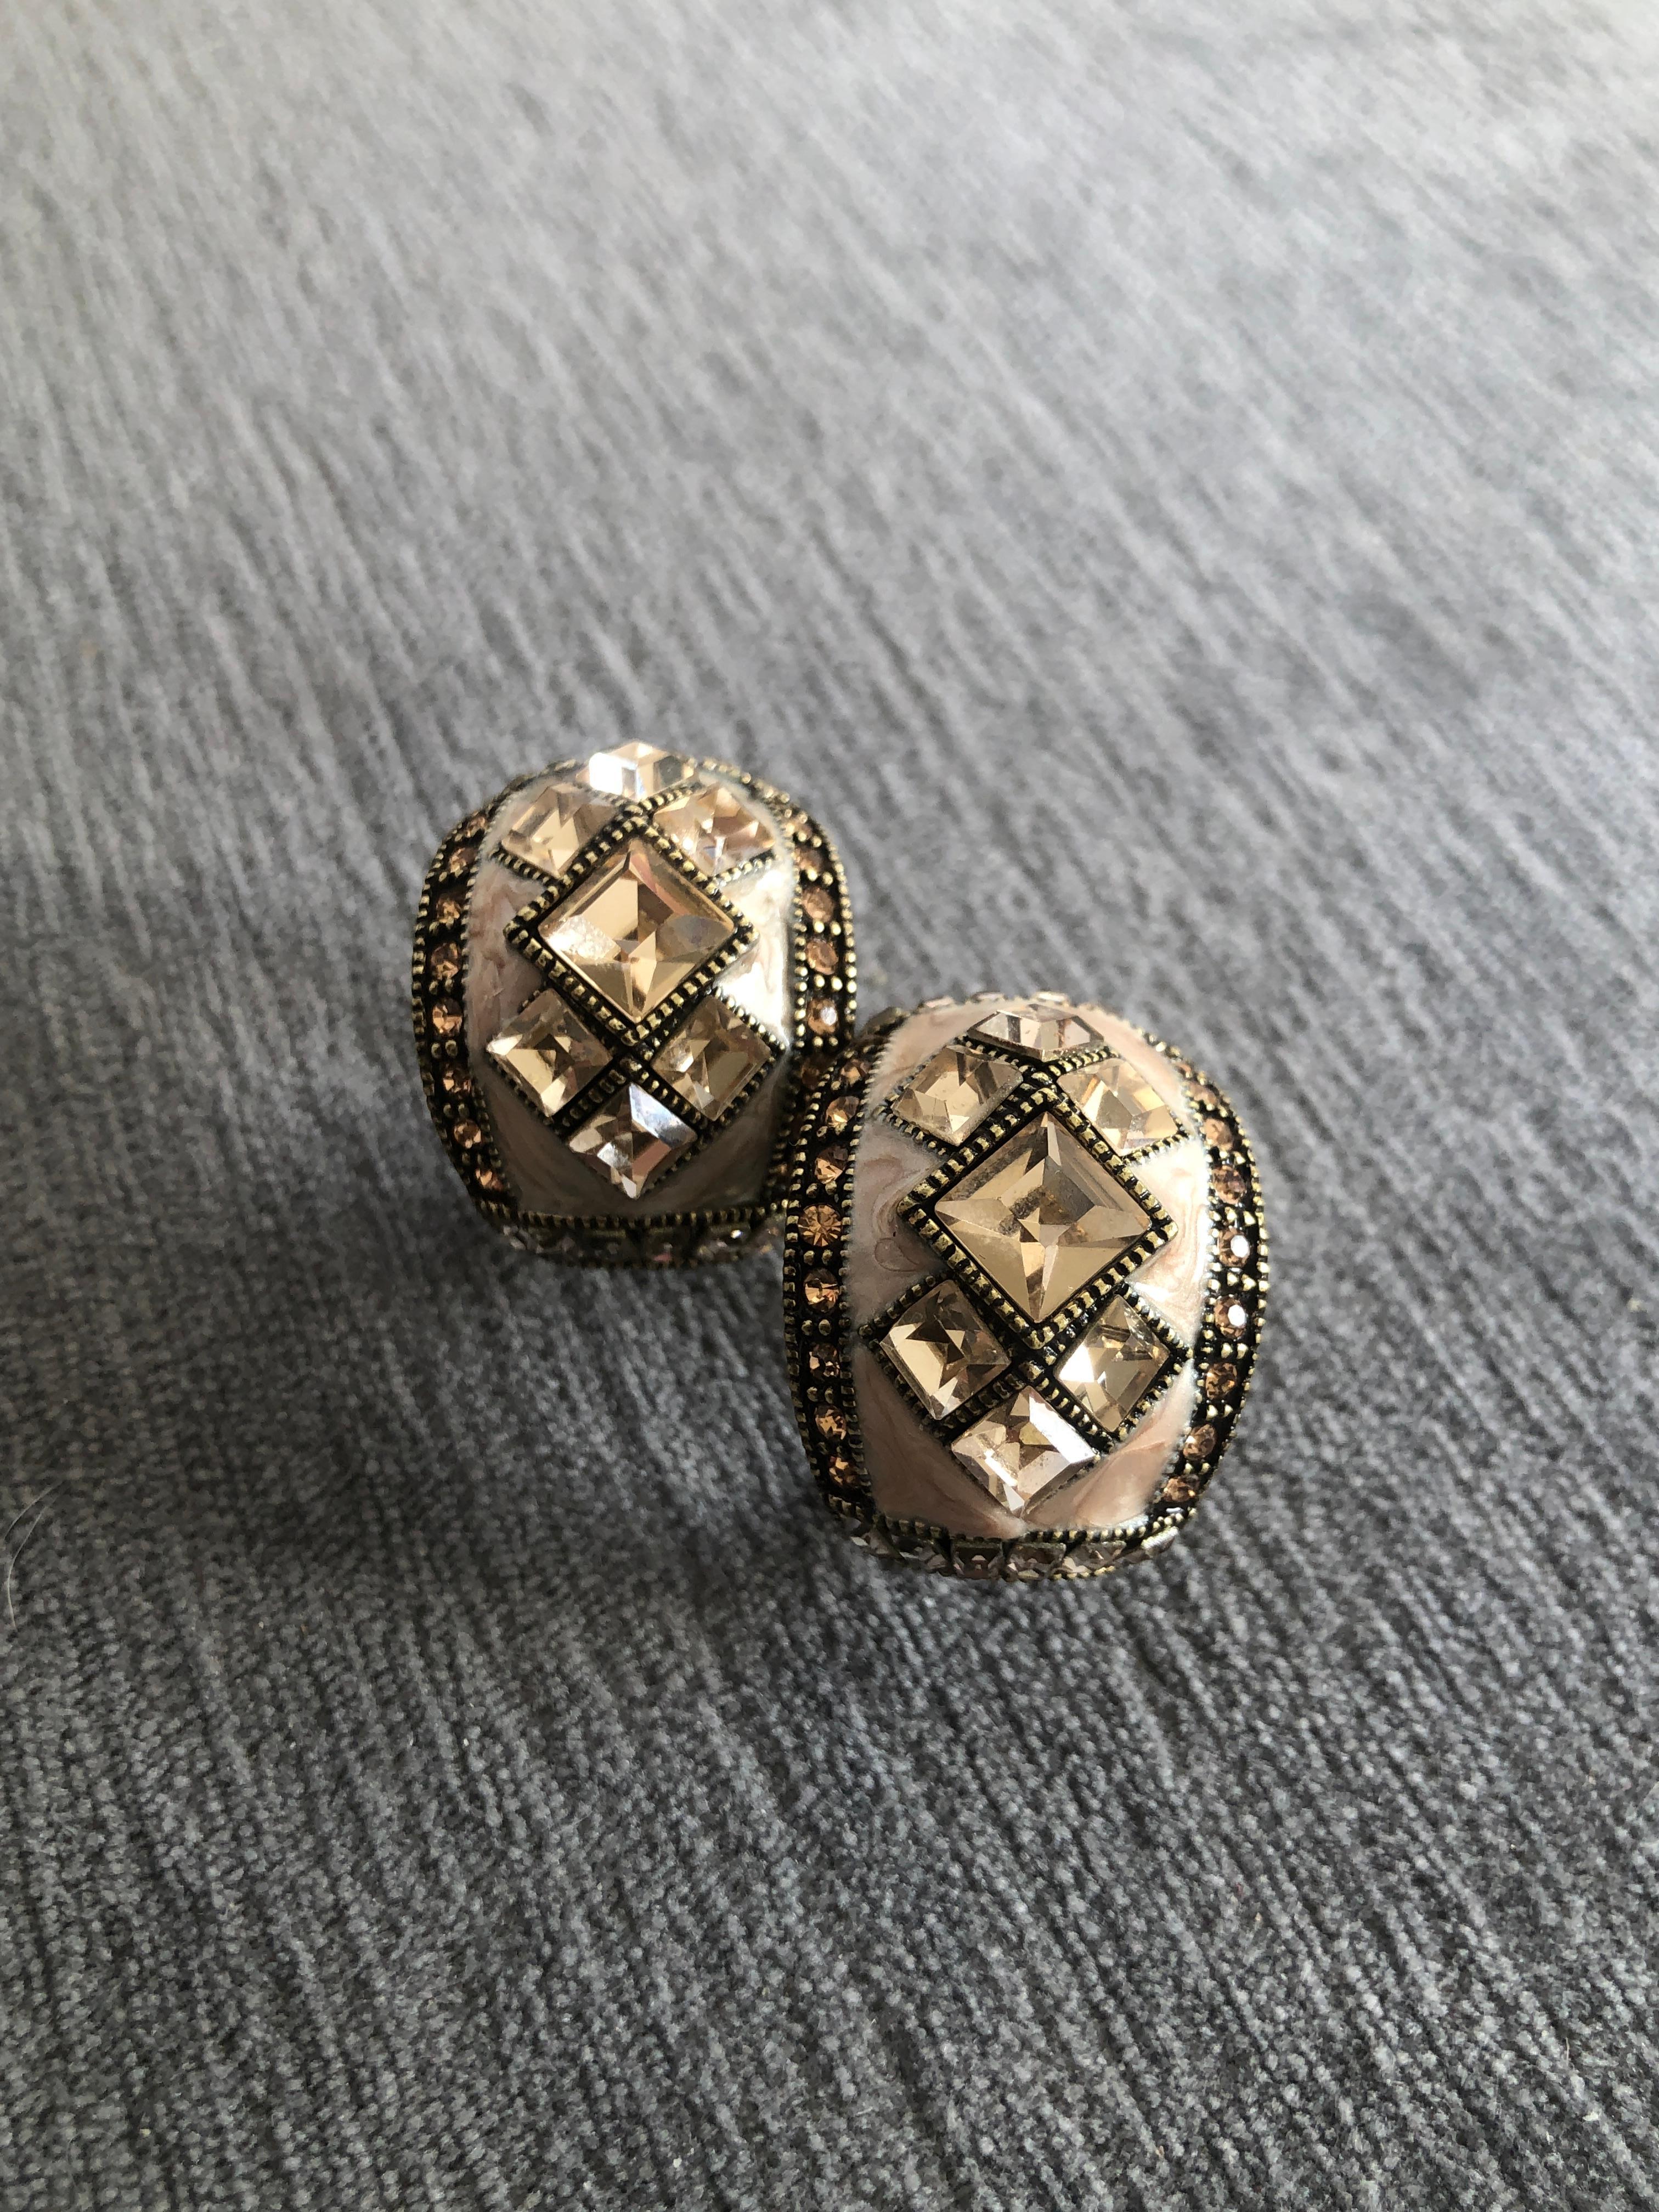 Art Deco Champagne Crystal Curved Glamour Earrings by Heid Daus Lever Pierced In Good Condition For Sale In Palm Springs, CA